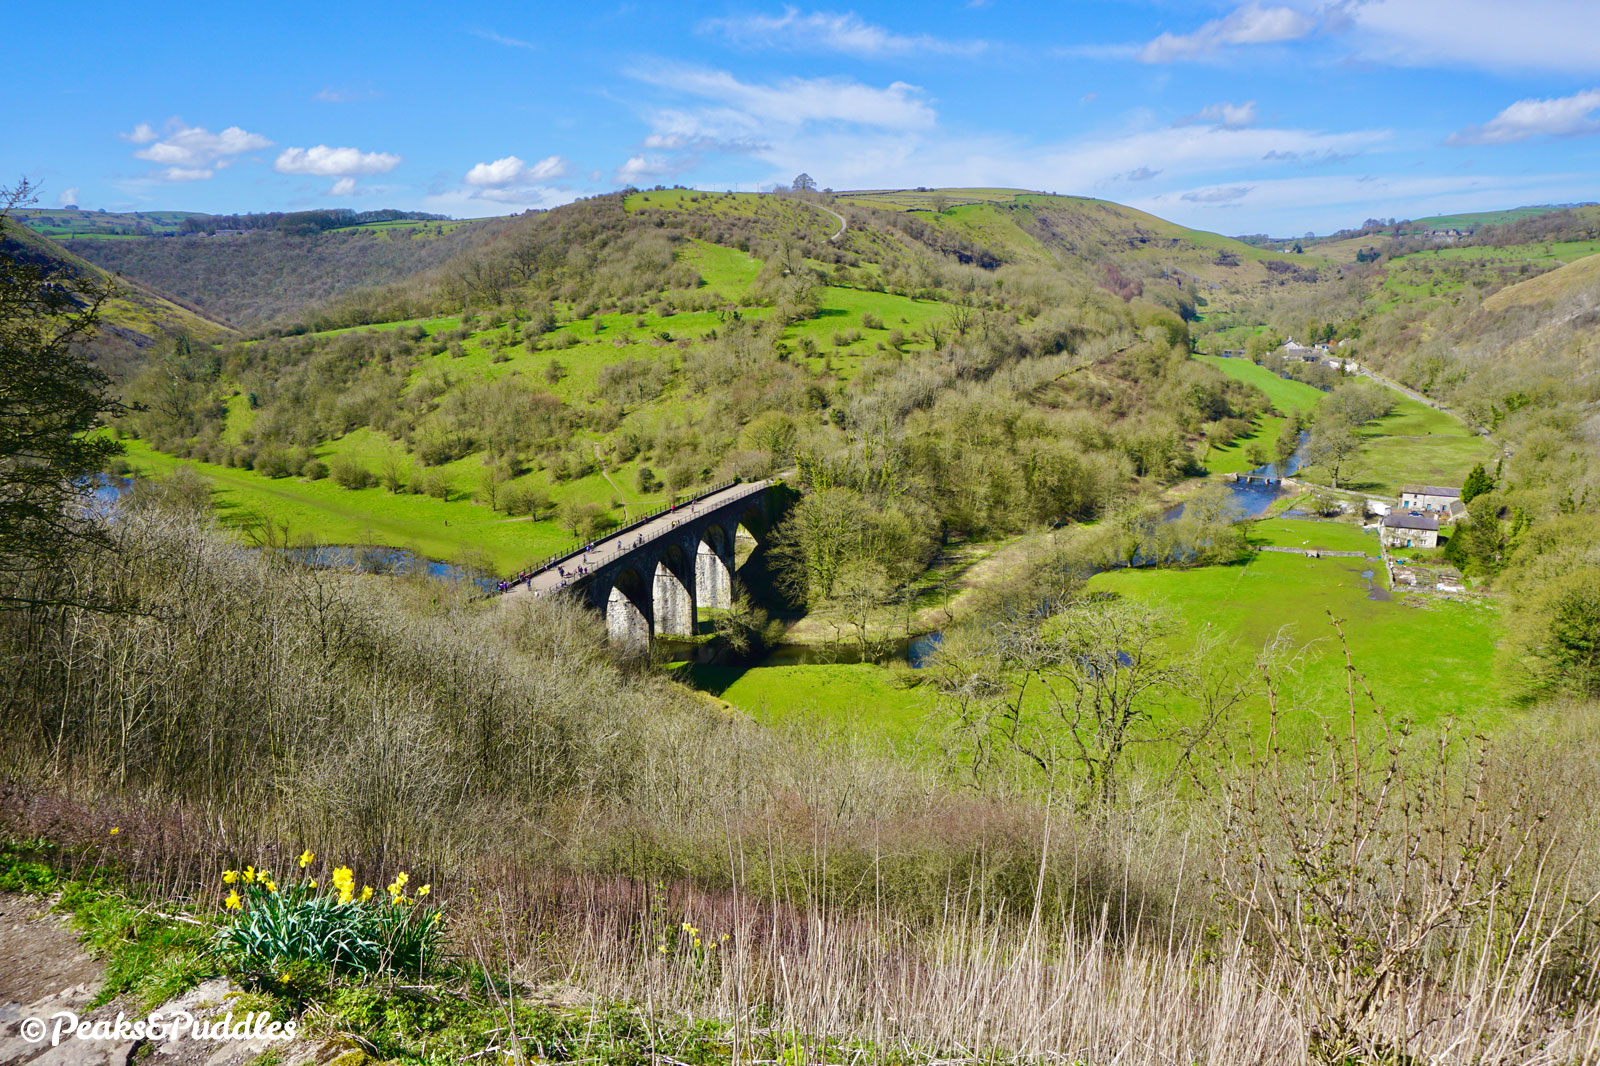 High above the valley, Monsal Head provides the most famous view of Headstone Viaduct and Monsal Dale. This is a fairly long and arduous climb on foot from the trail.